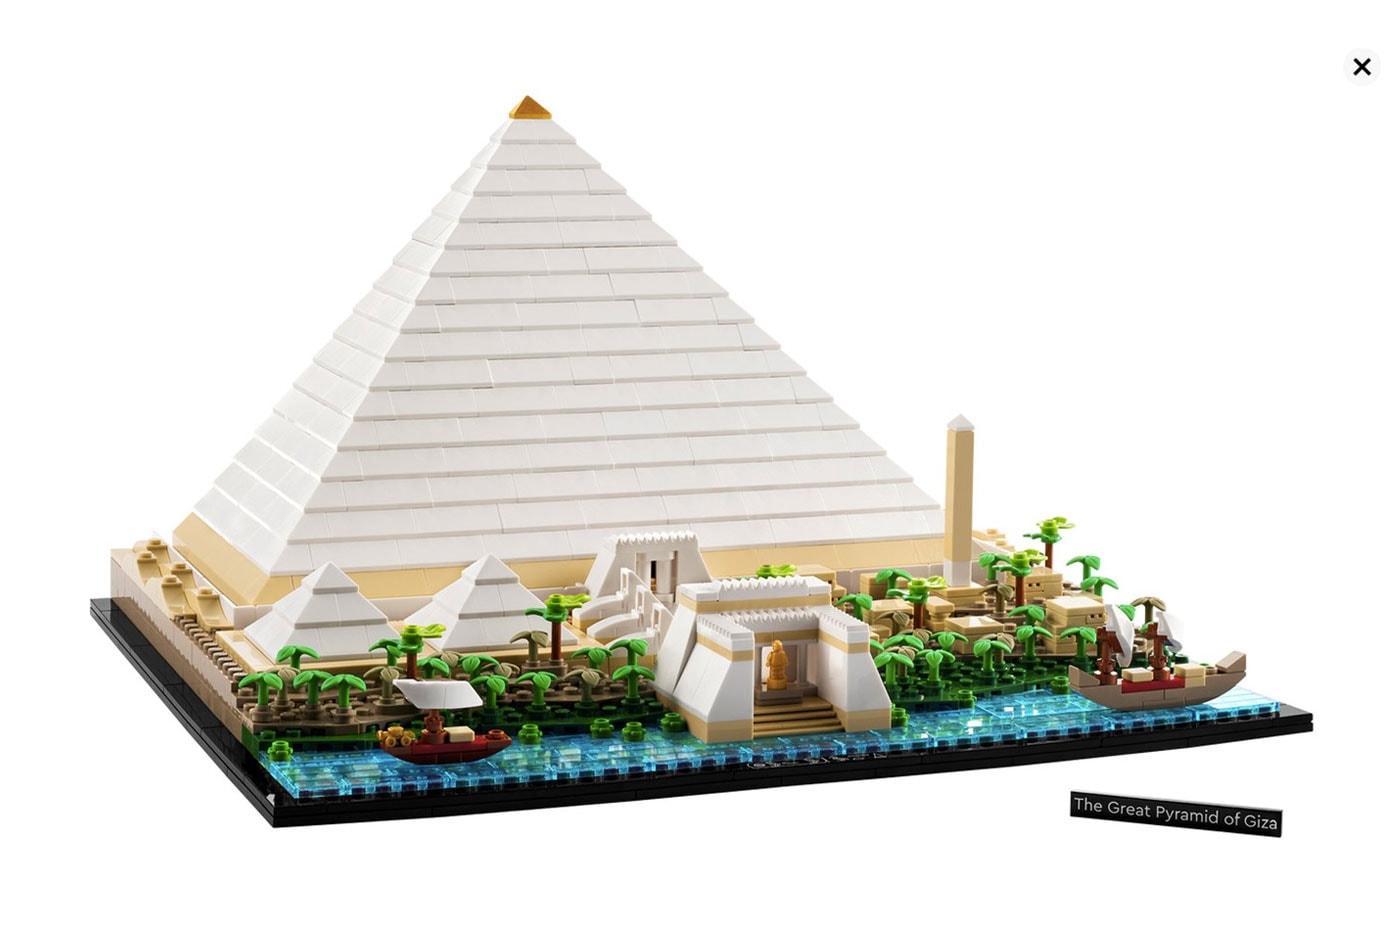 LEGO Architecture egyptian pyramid of giza 1476 blocks  seven wonders of the ancient world main tunnels chambers nile obelisk sphinx  release info date price 